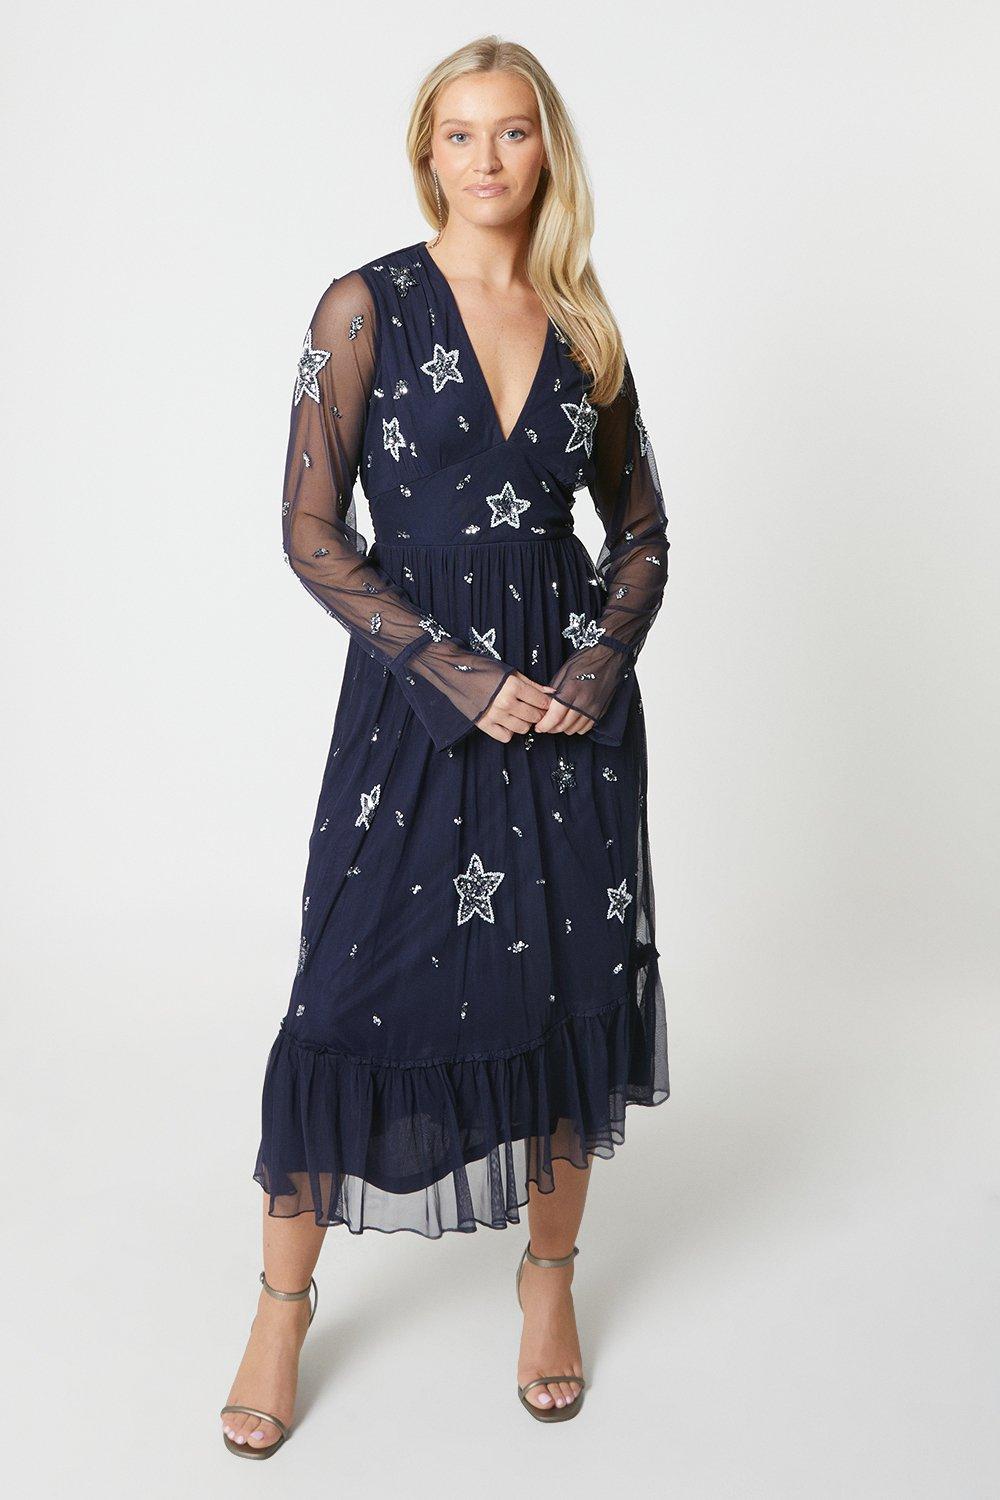 Debut London by Coast Long Sleeve Star Embellished Tiered Midi Dress